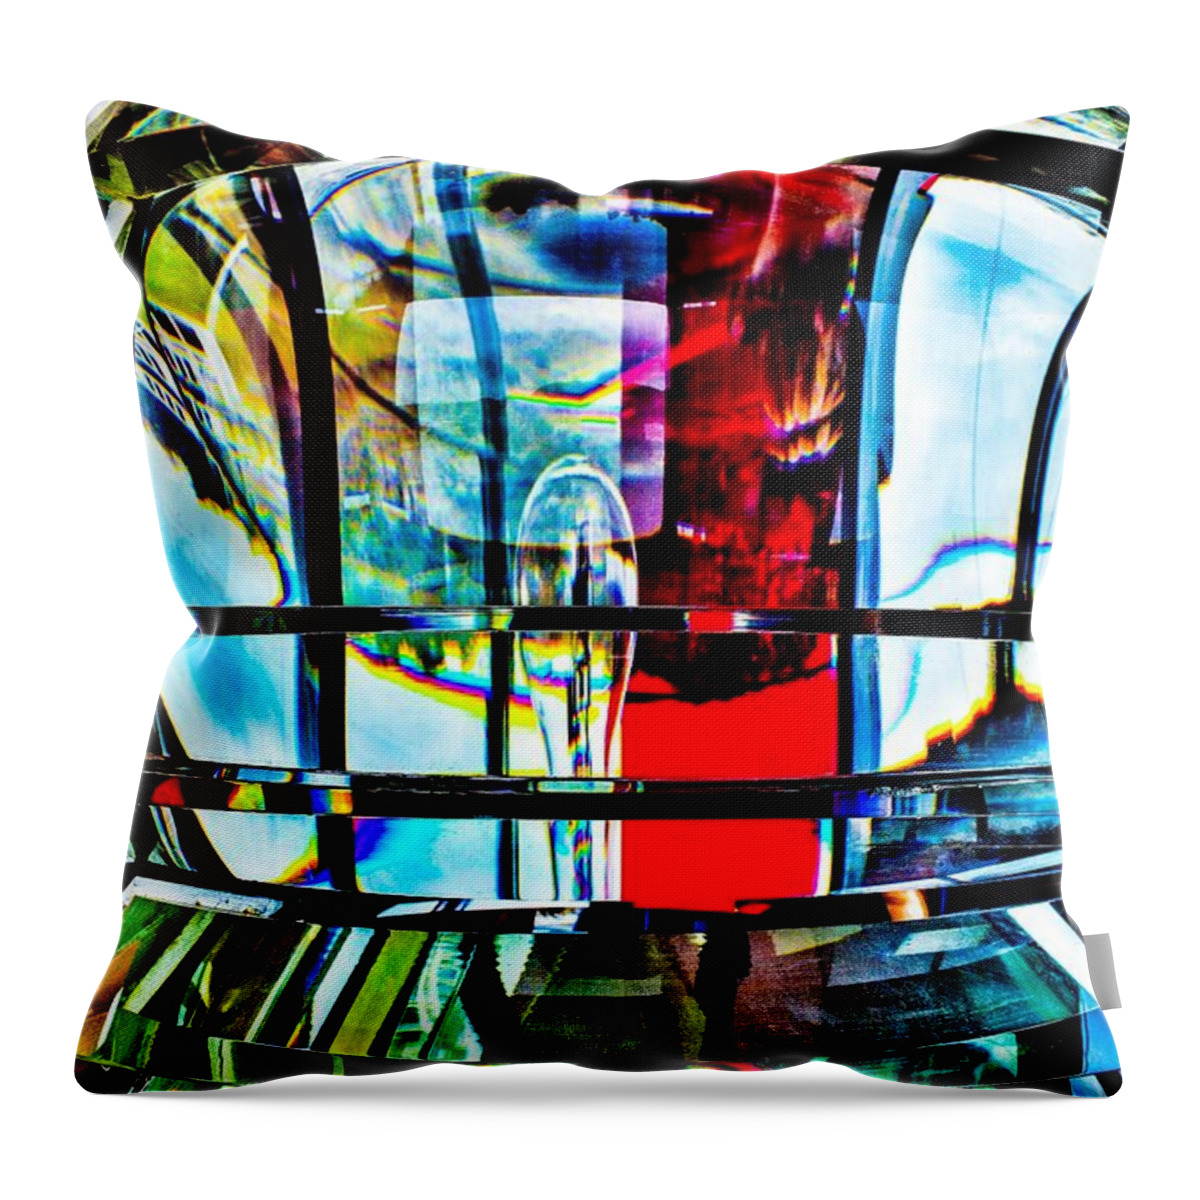 Fresnel Lens Throw Pillow featuring the photograph Fresnel Lens by Addison Likins